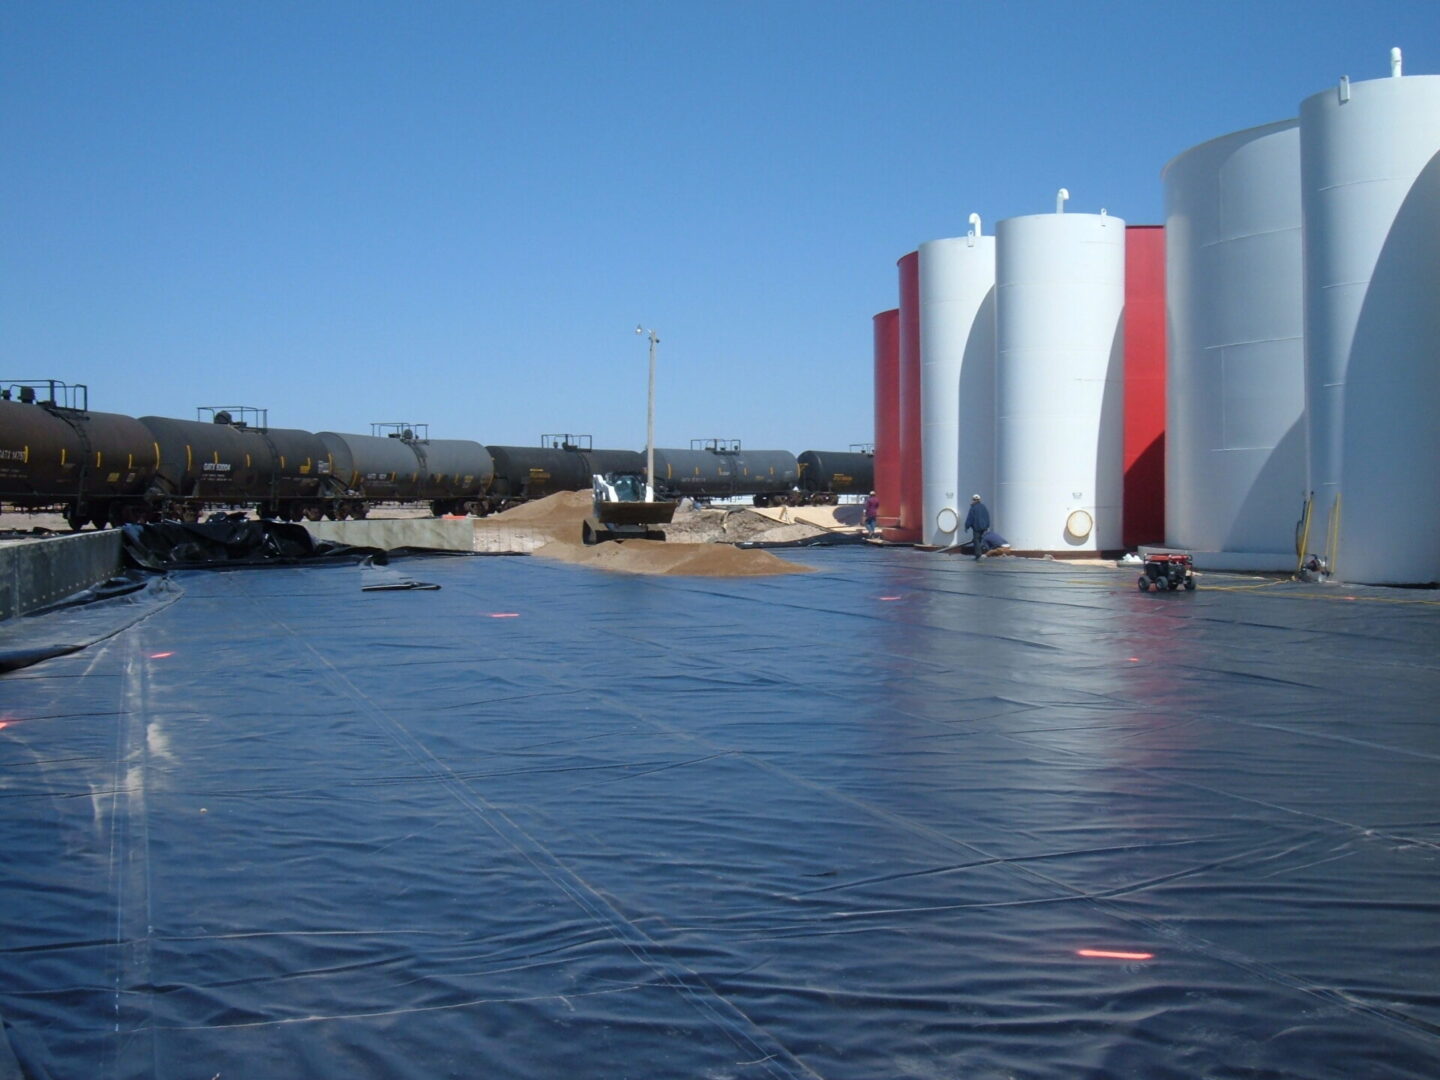 A view of some water and several large tanks.